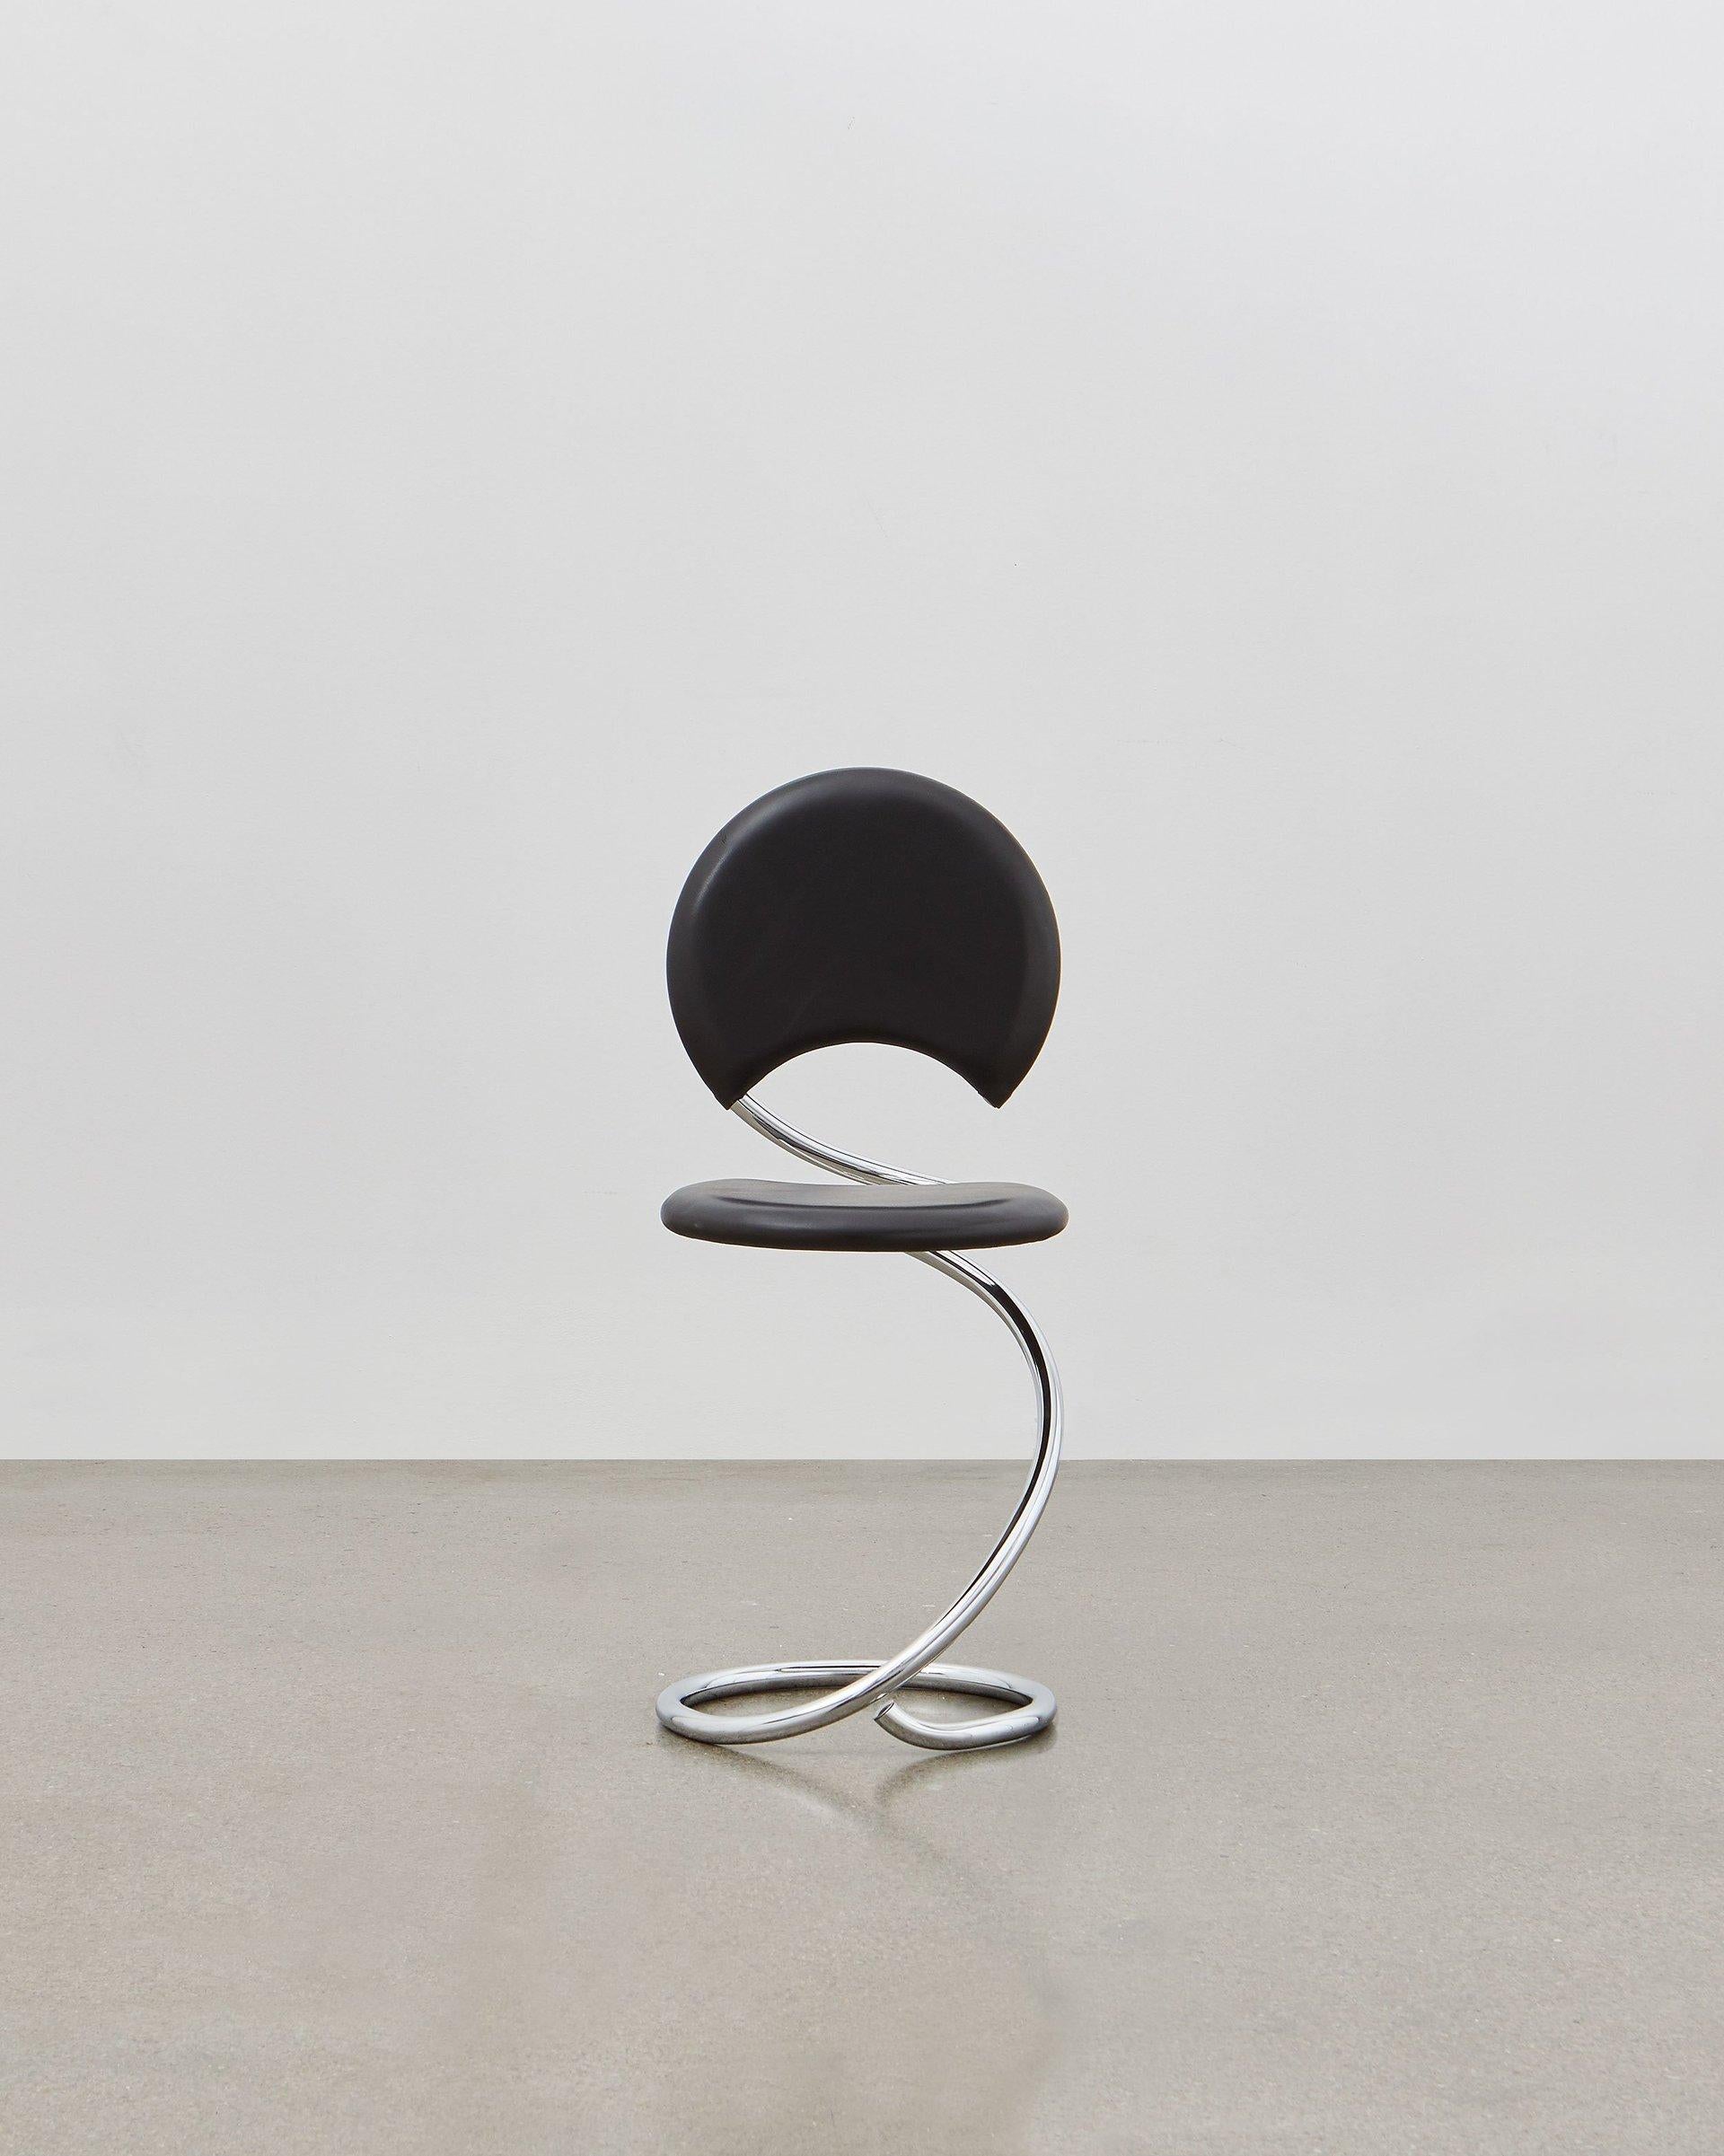 The PH snake chairs flowing lines within its steel tube design are inspired by the strong yet flexible body of a snake. It is multi-use and fits any room at home, in the apartment, in the office, with a function or simply as a piece of art to be